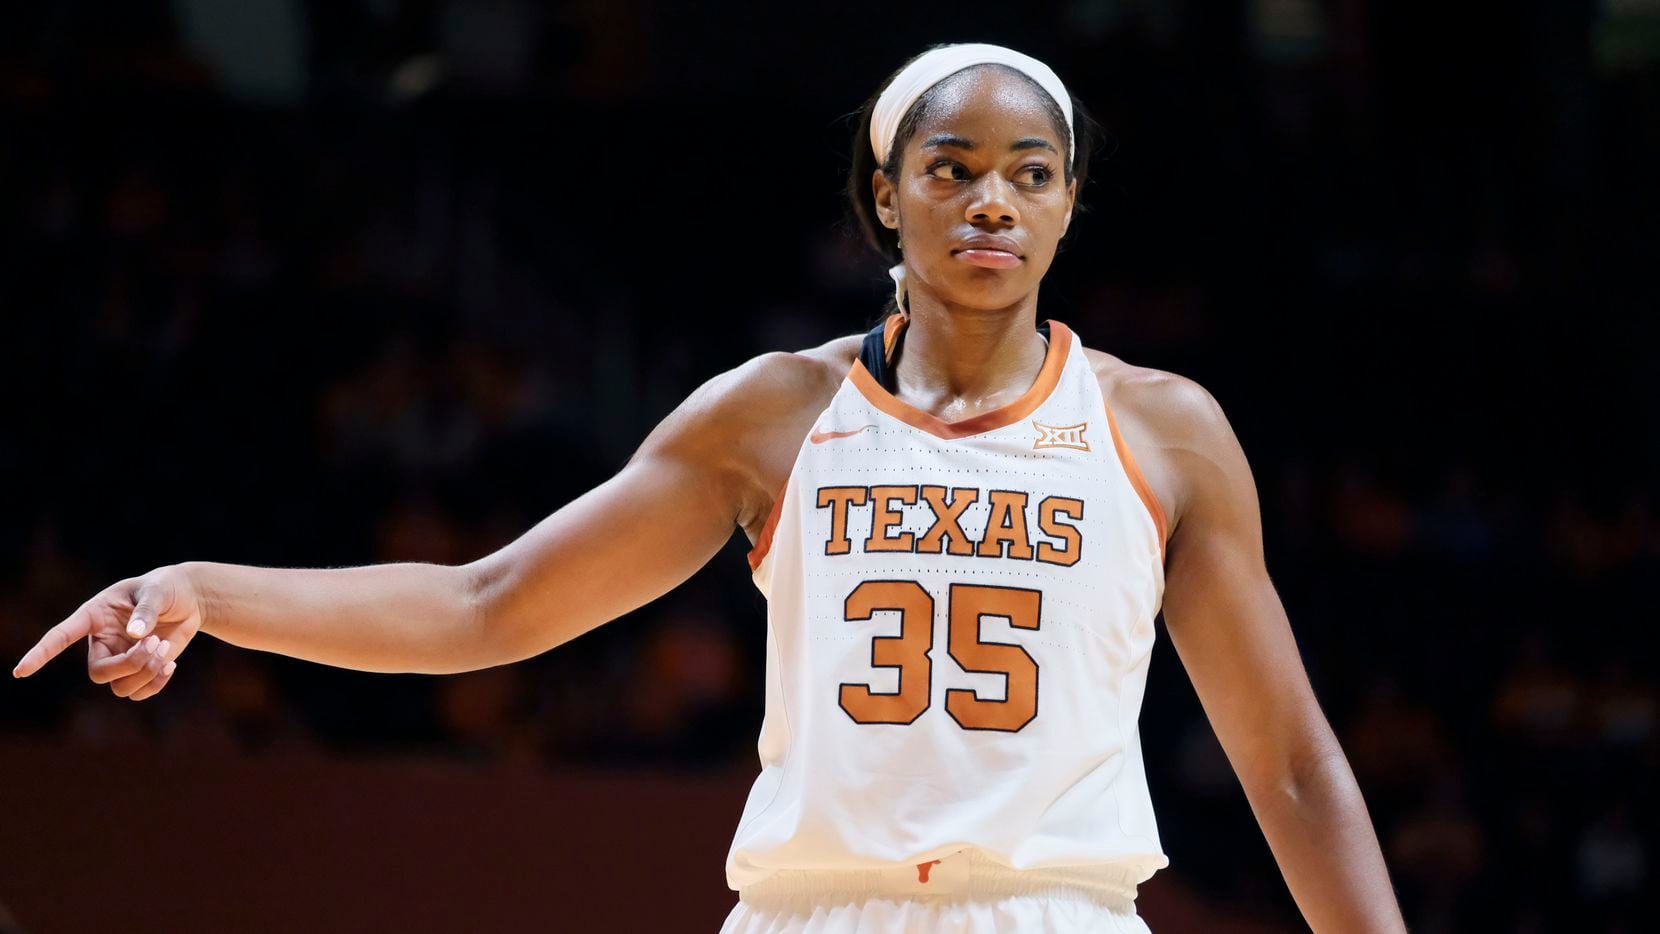 Texas forward Charli Collier (35) during an NCAA women's basketball game against Tennessee on Sunday, Dec. 8, 2019 in Knoxville, Tenn.